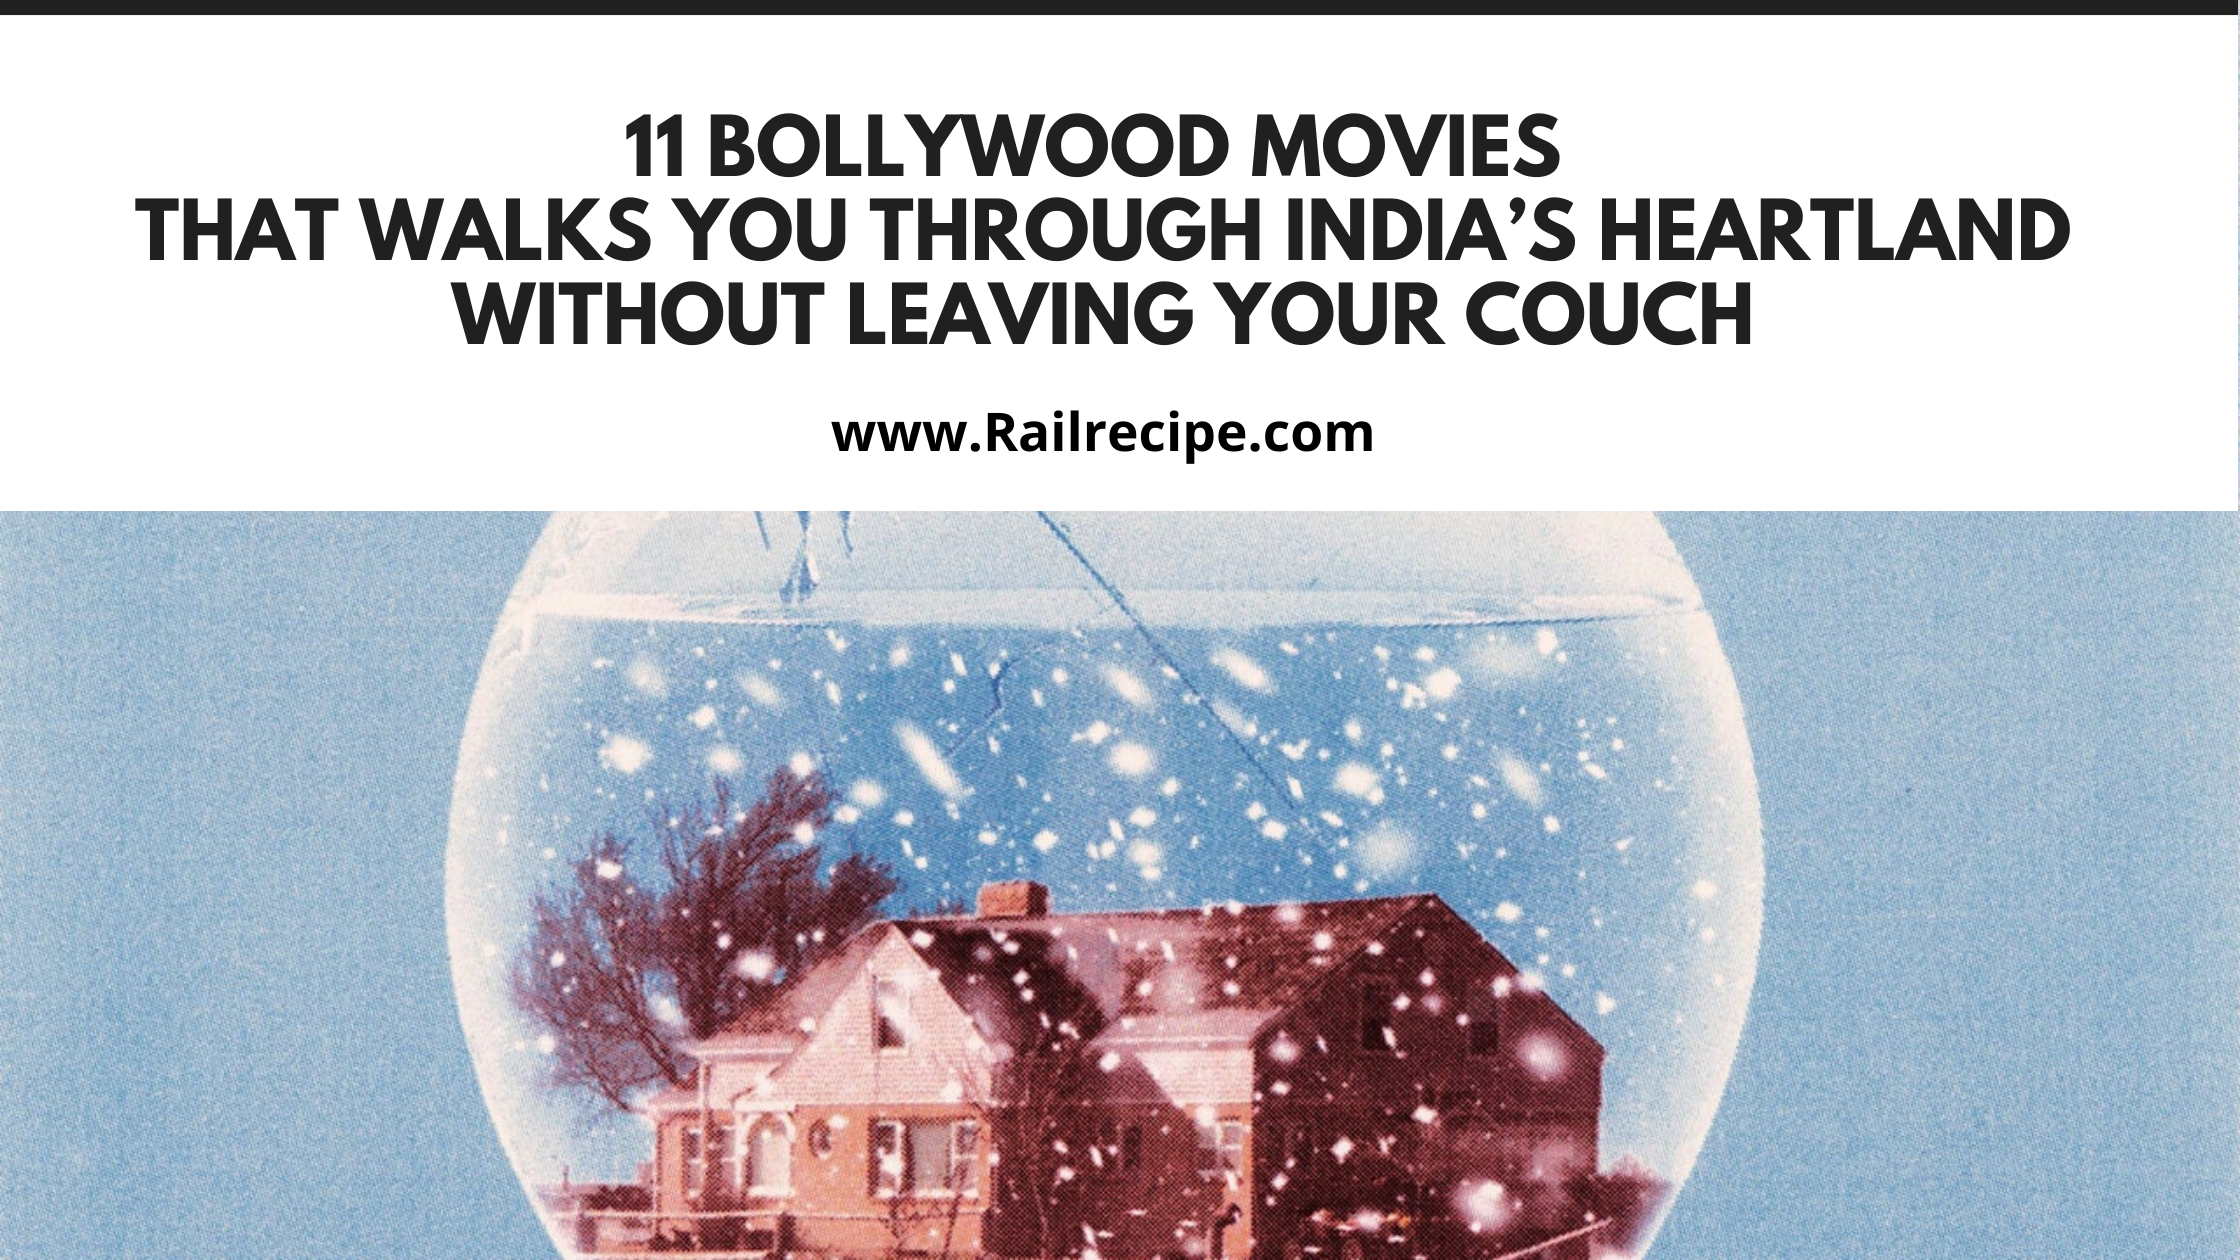 11 Bollywood Movies that Walks You through India’s Heartland without Leaving Your Couch